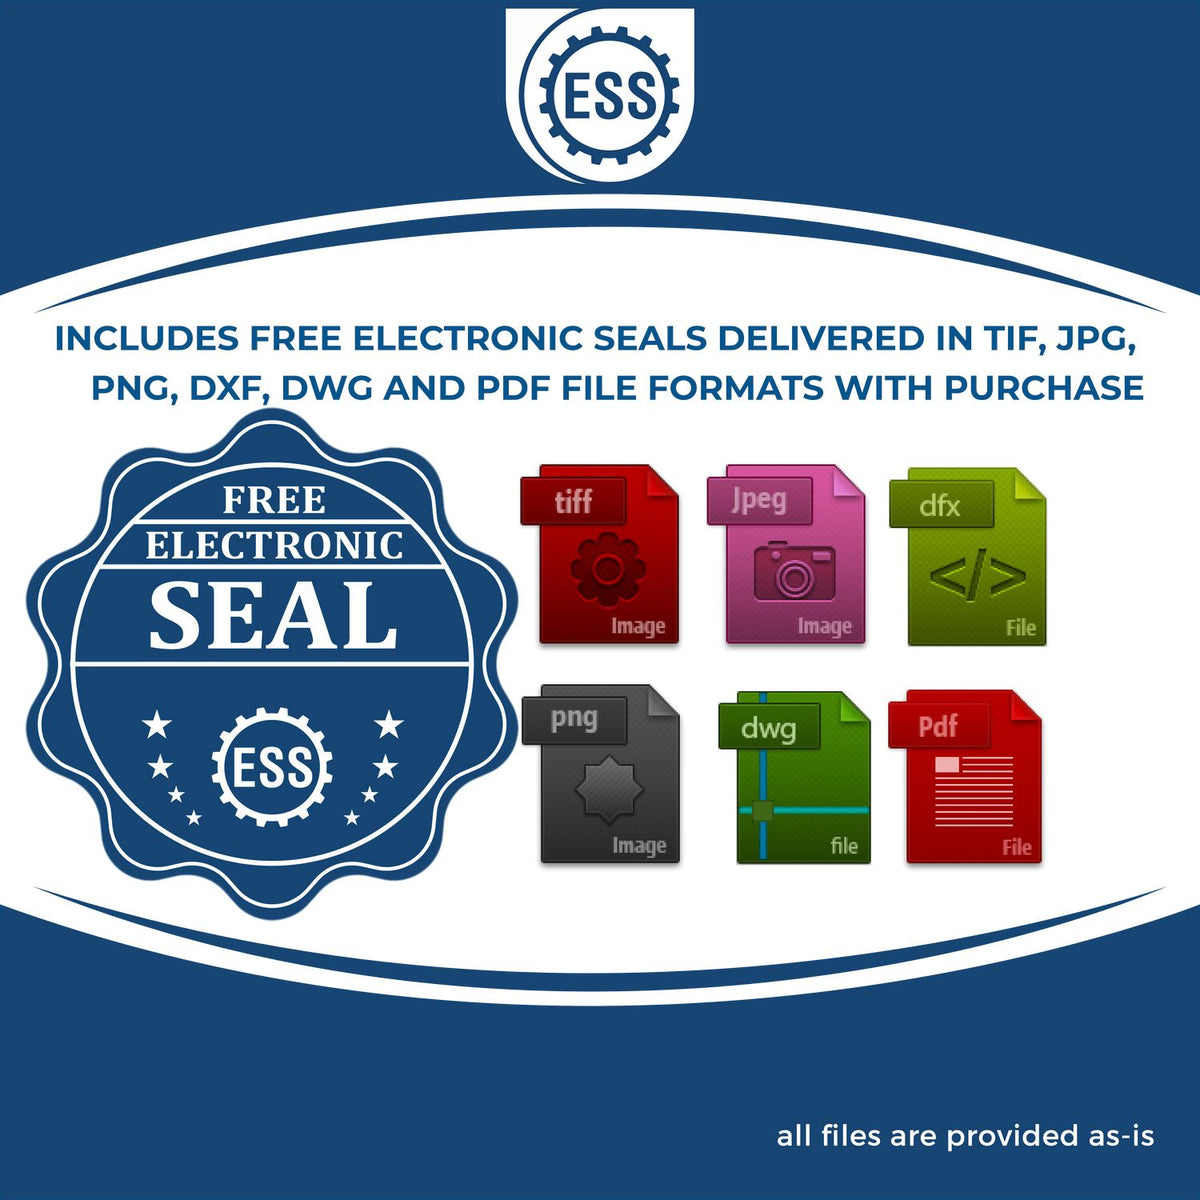 An infographic for the free electronic seal for the State of Tennessee Architectural Seal Embosser illustrating the different file type icons such as DXF, DWG, TIF, JPG and PNG.